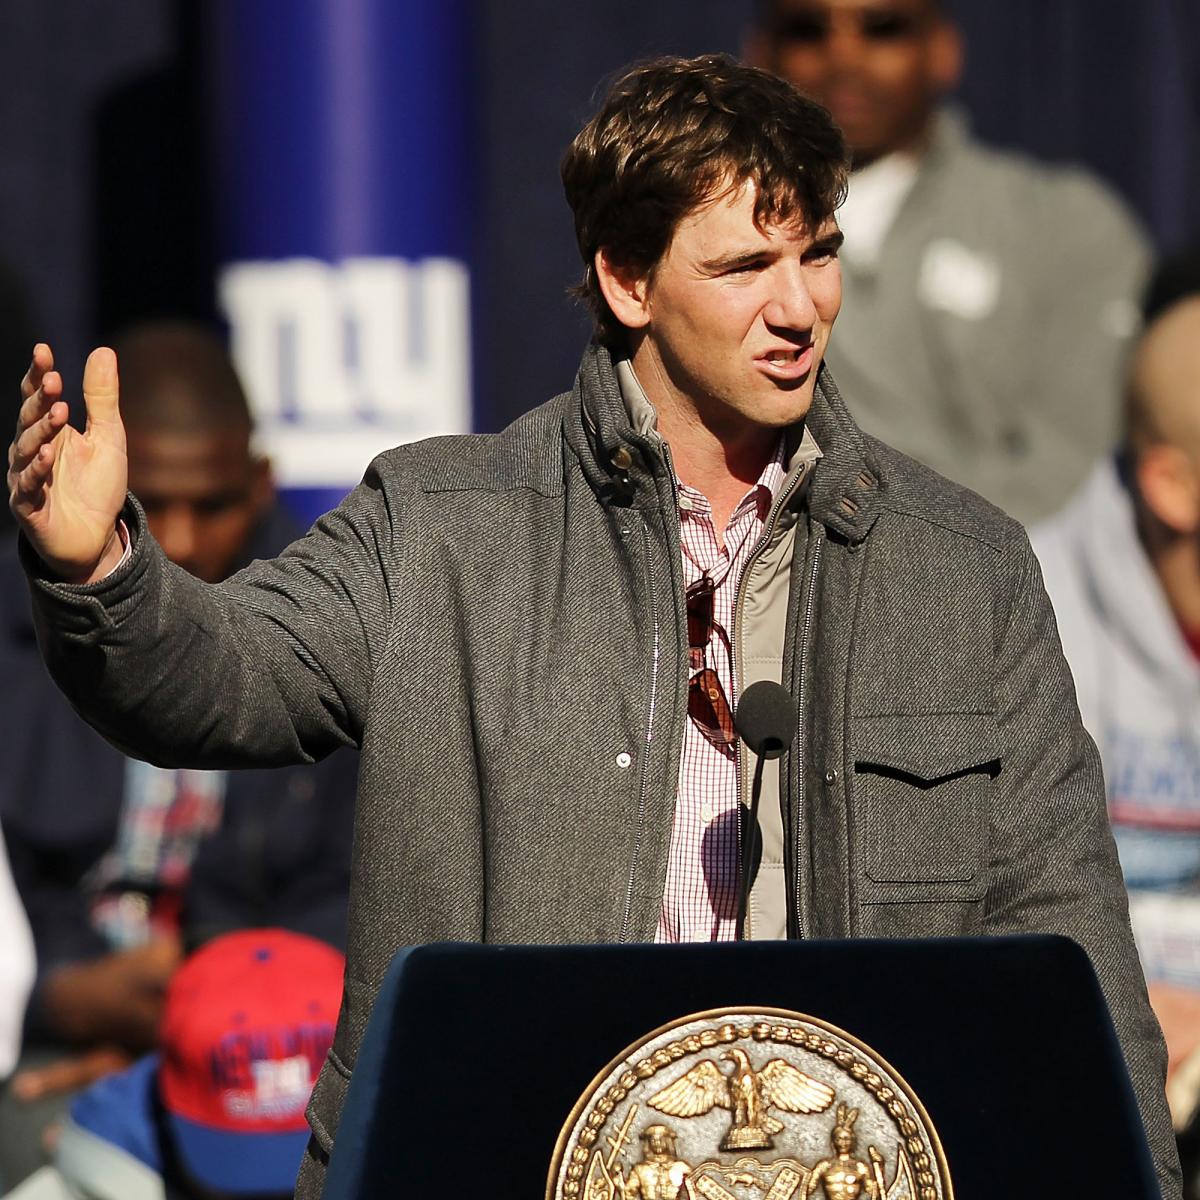 Eli Manning SNL: Giants QB Won #39 t Live Up to Hosting Hype for Comedy